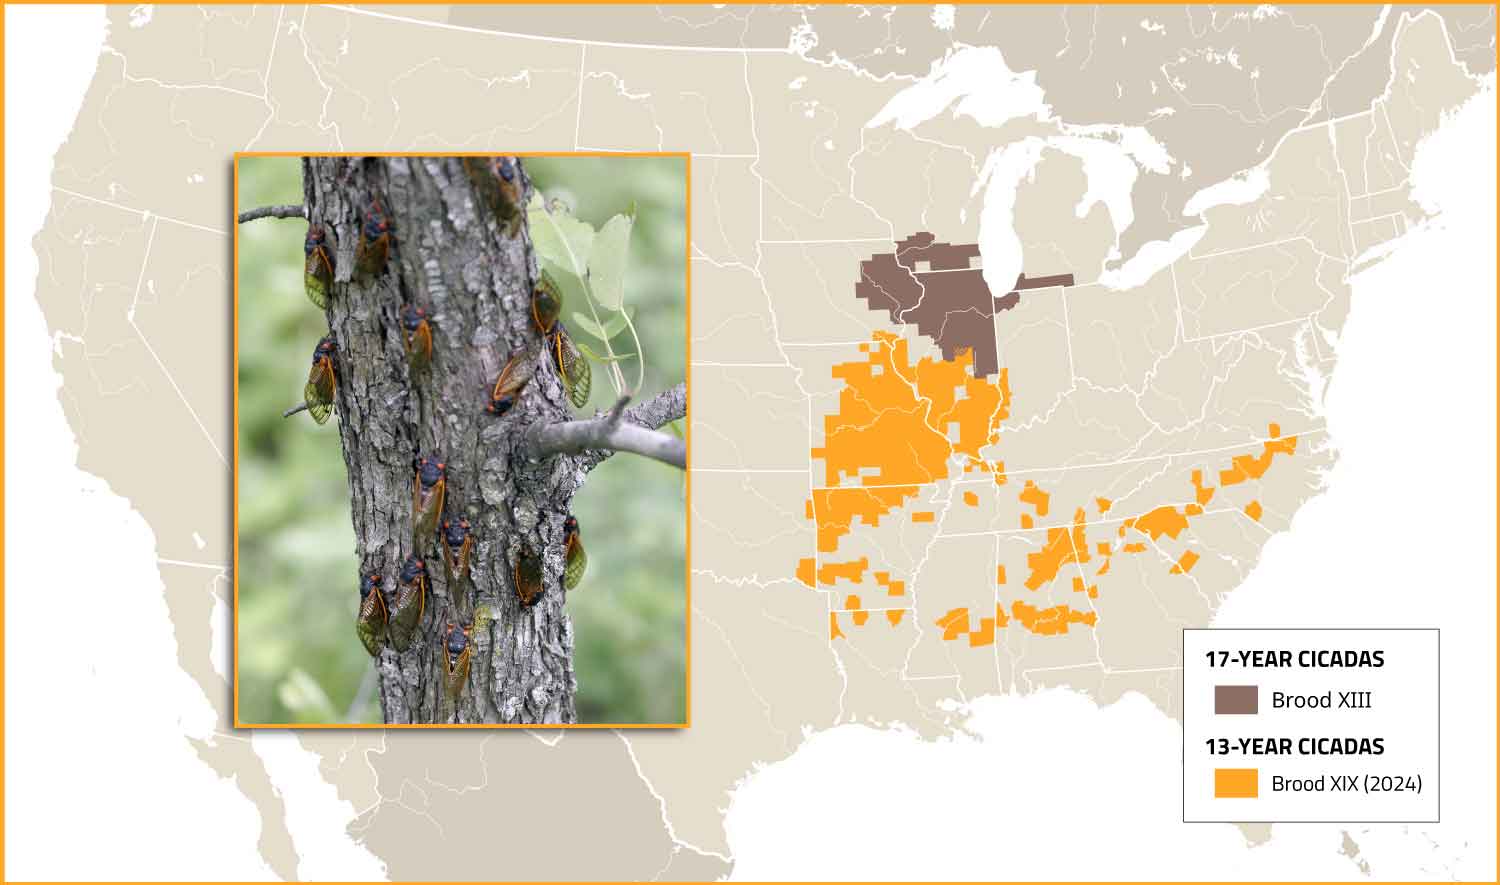 A map of the United States with the locations of the two broods indicated along with an inset of cicadas on a tree.